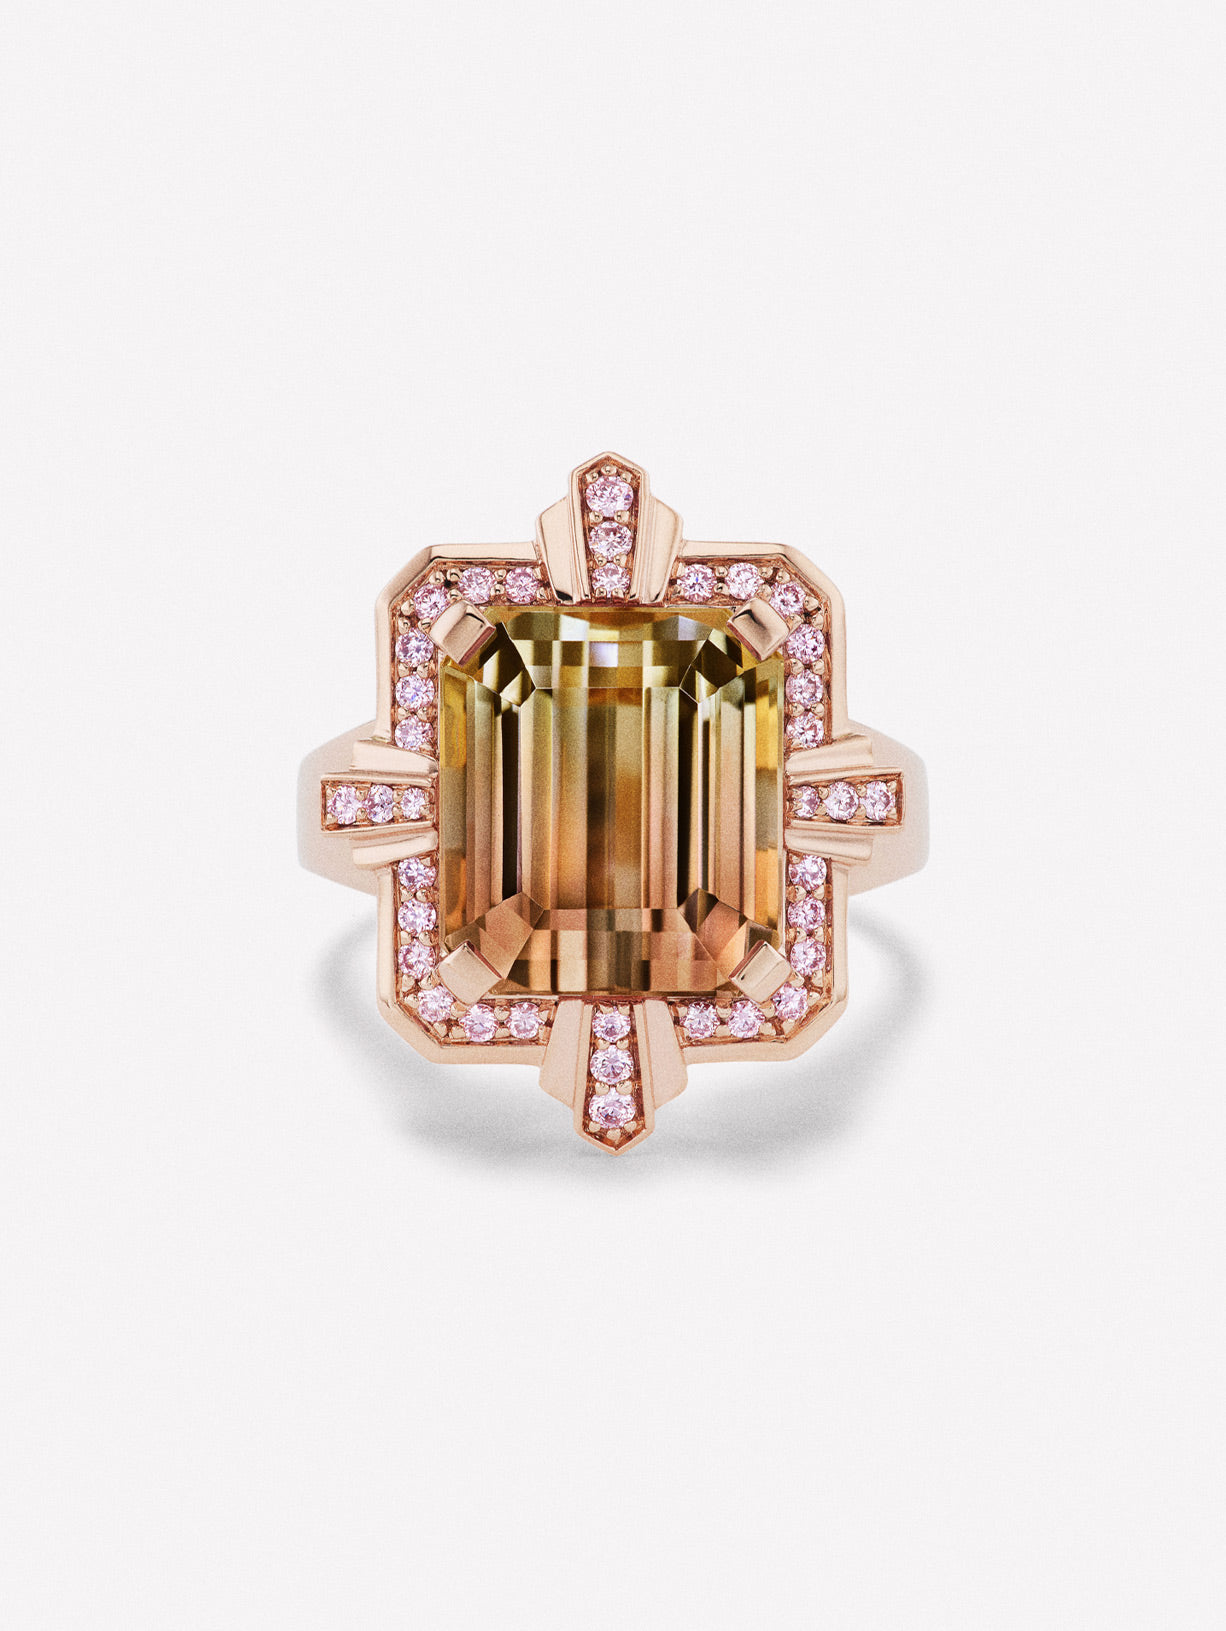 Deco Inspired Argyle Pink™ Diamond and Bi Color Tourmaline Ring by J FINE with a 10.28ct Bi Color Tourmaline and 0.29ct Argyle Pink™ Diamonds.